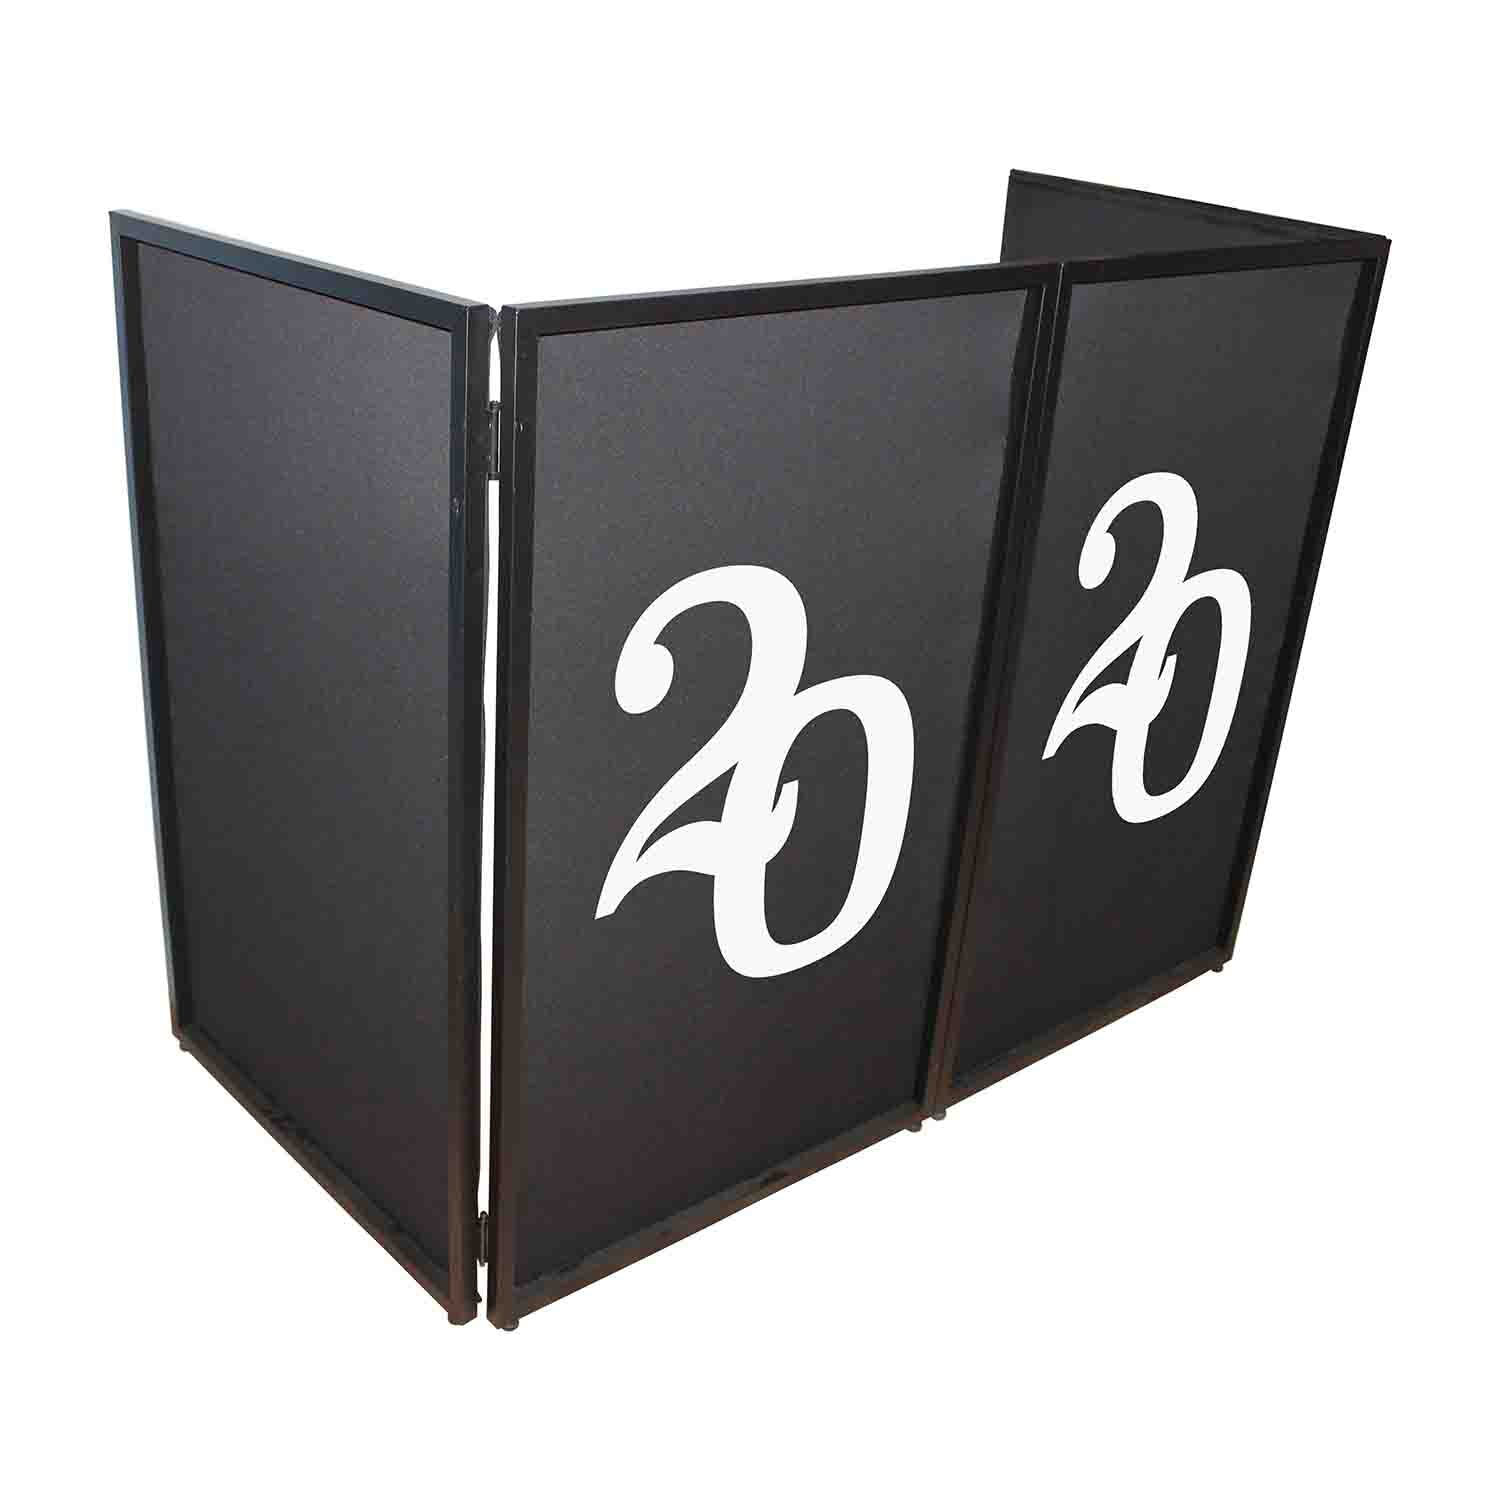 ProX XF-S2020X2 Set of Two 2020 Numerical Facade Enhancement Scrims - White Numbers on Black - Hollywood DJ